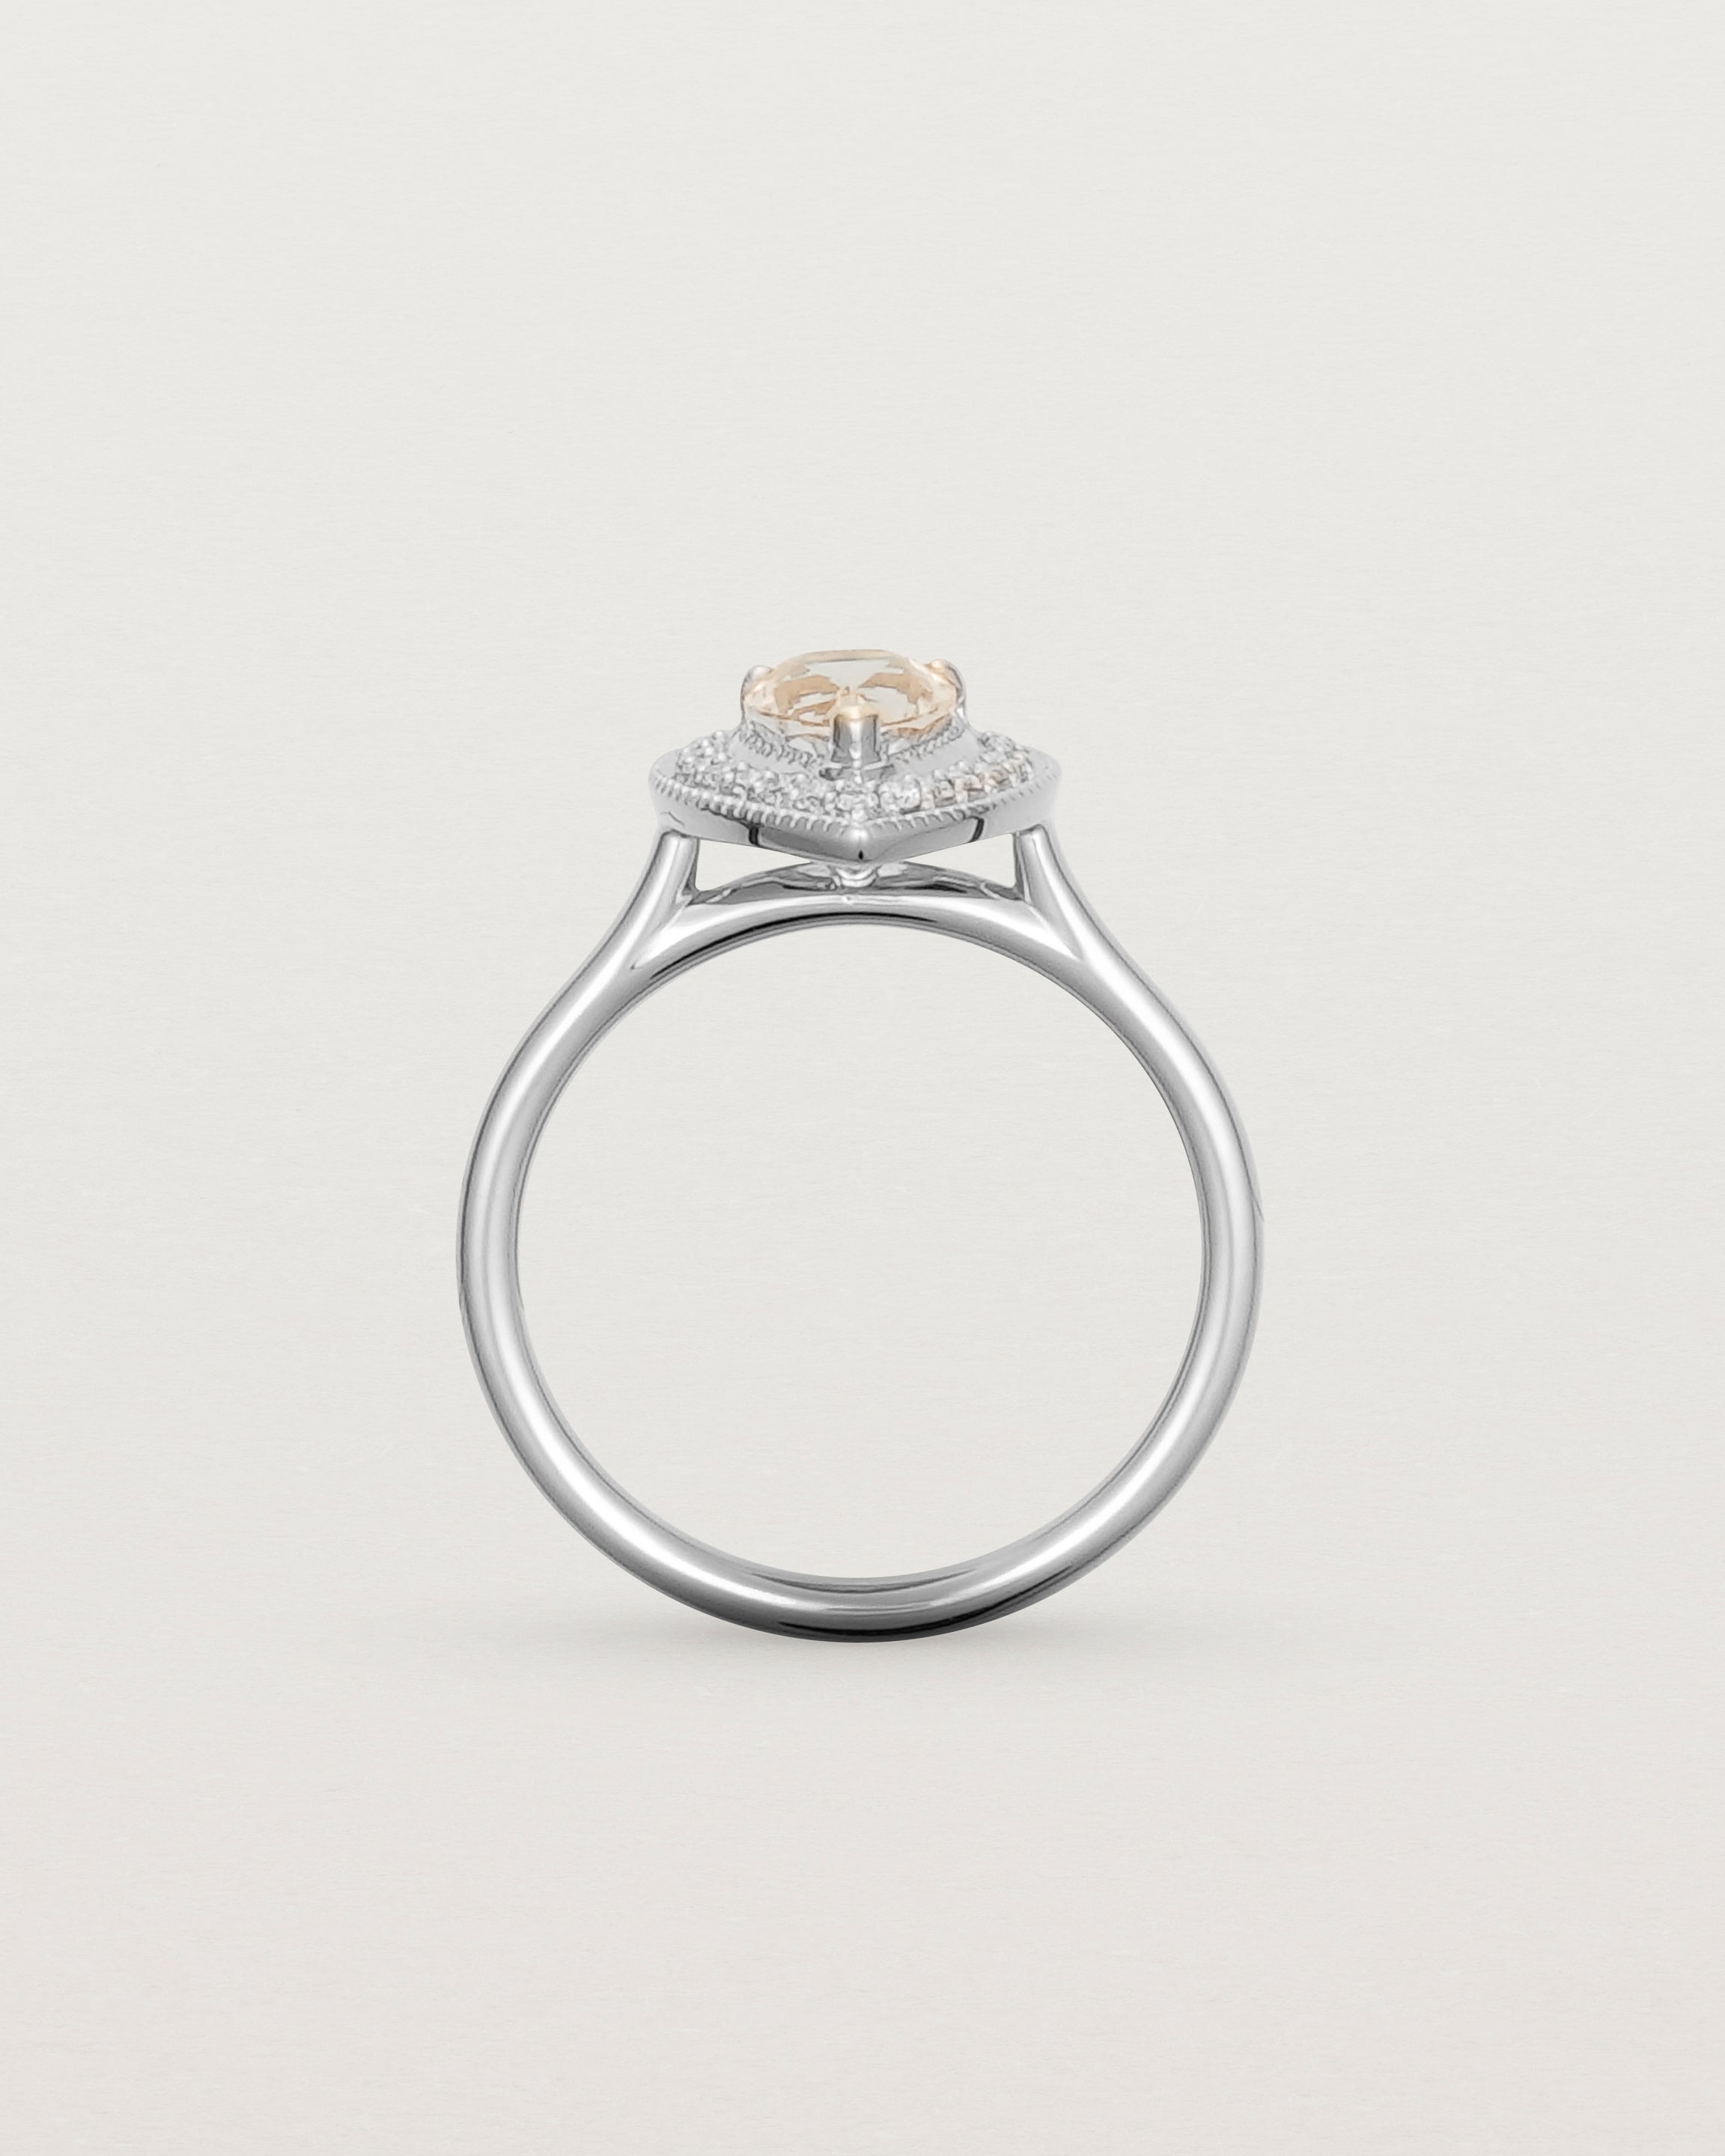 Standing view pear halo ring featuring a pear cut pale pink morganite and a halo of white diamonds in white gold